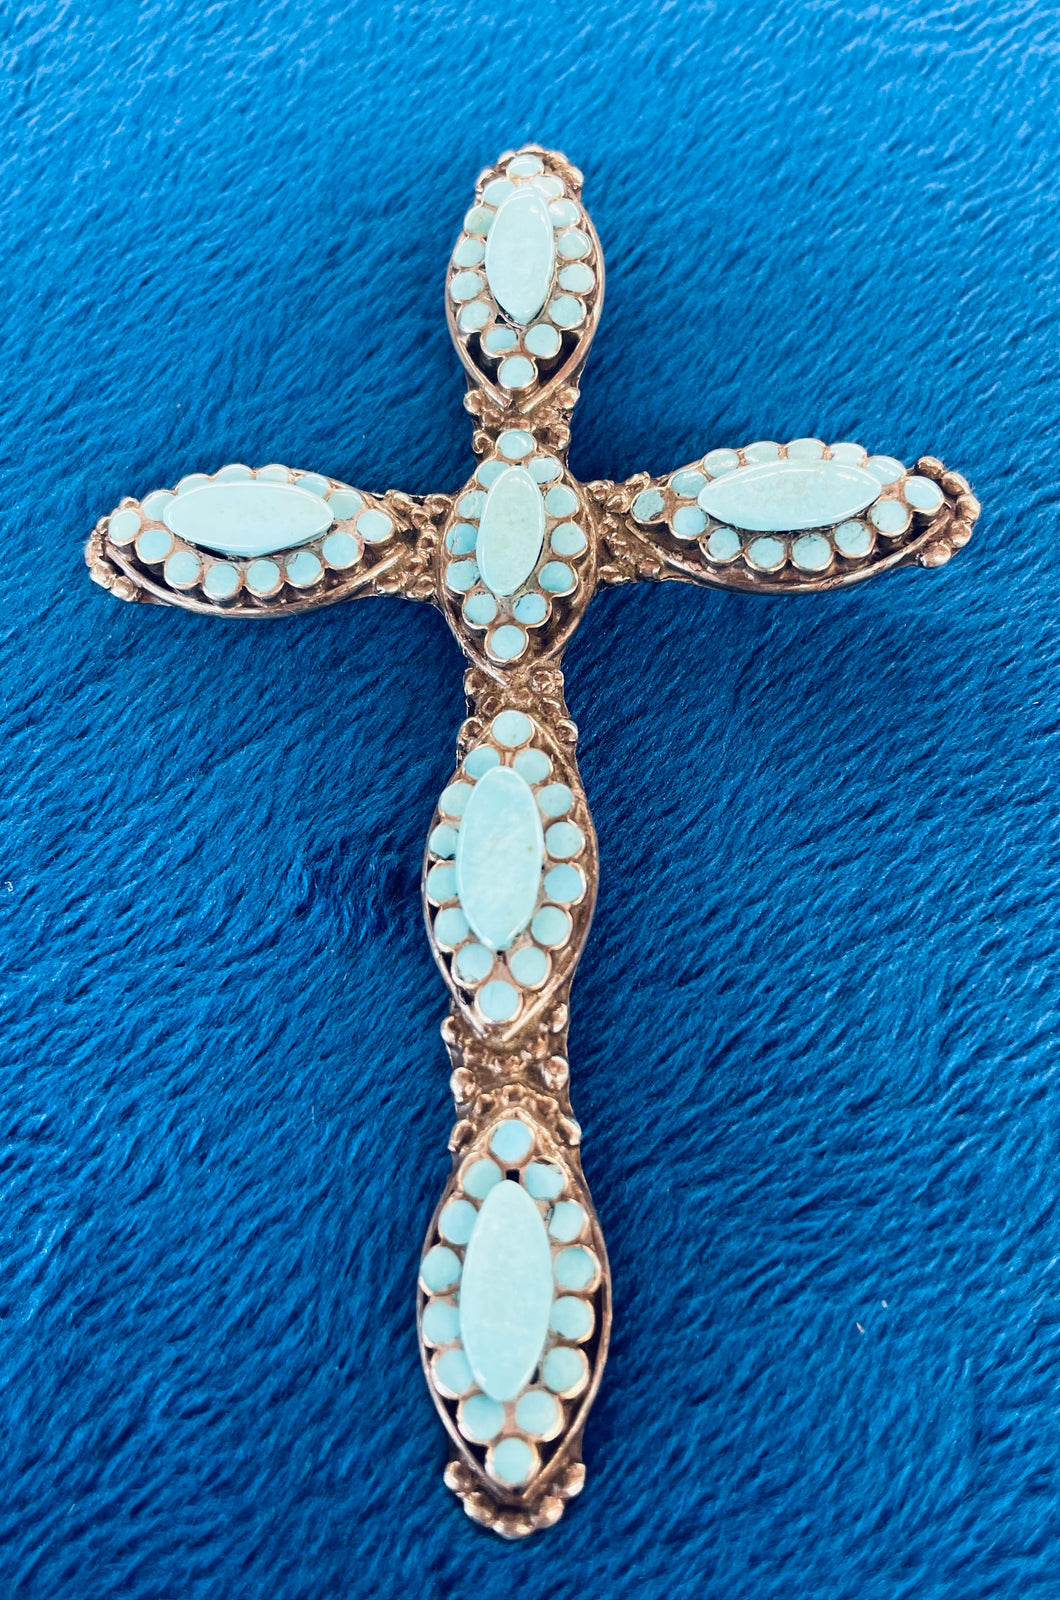 Turquoise and Silver Cross Pendant